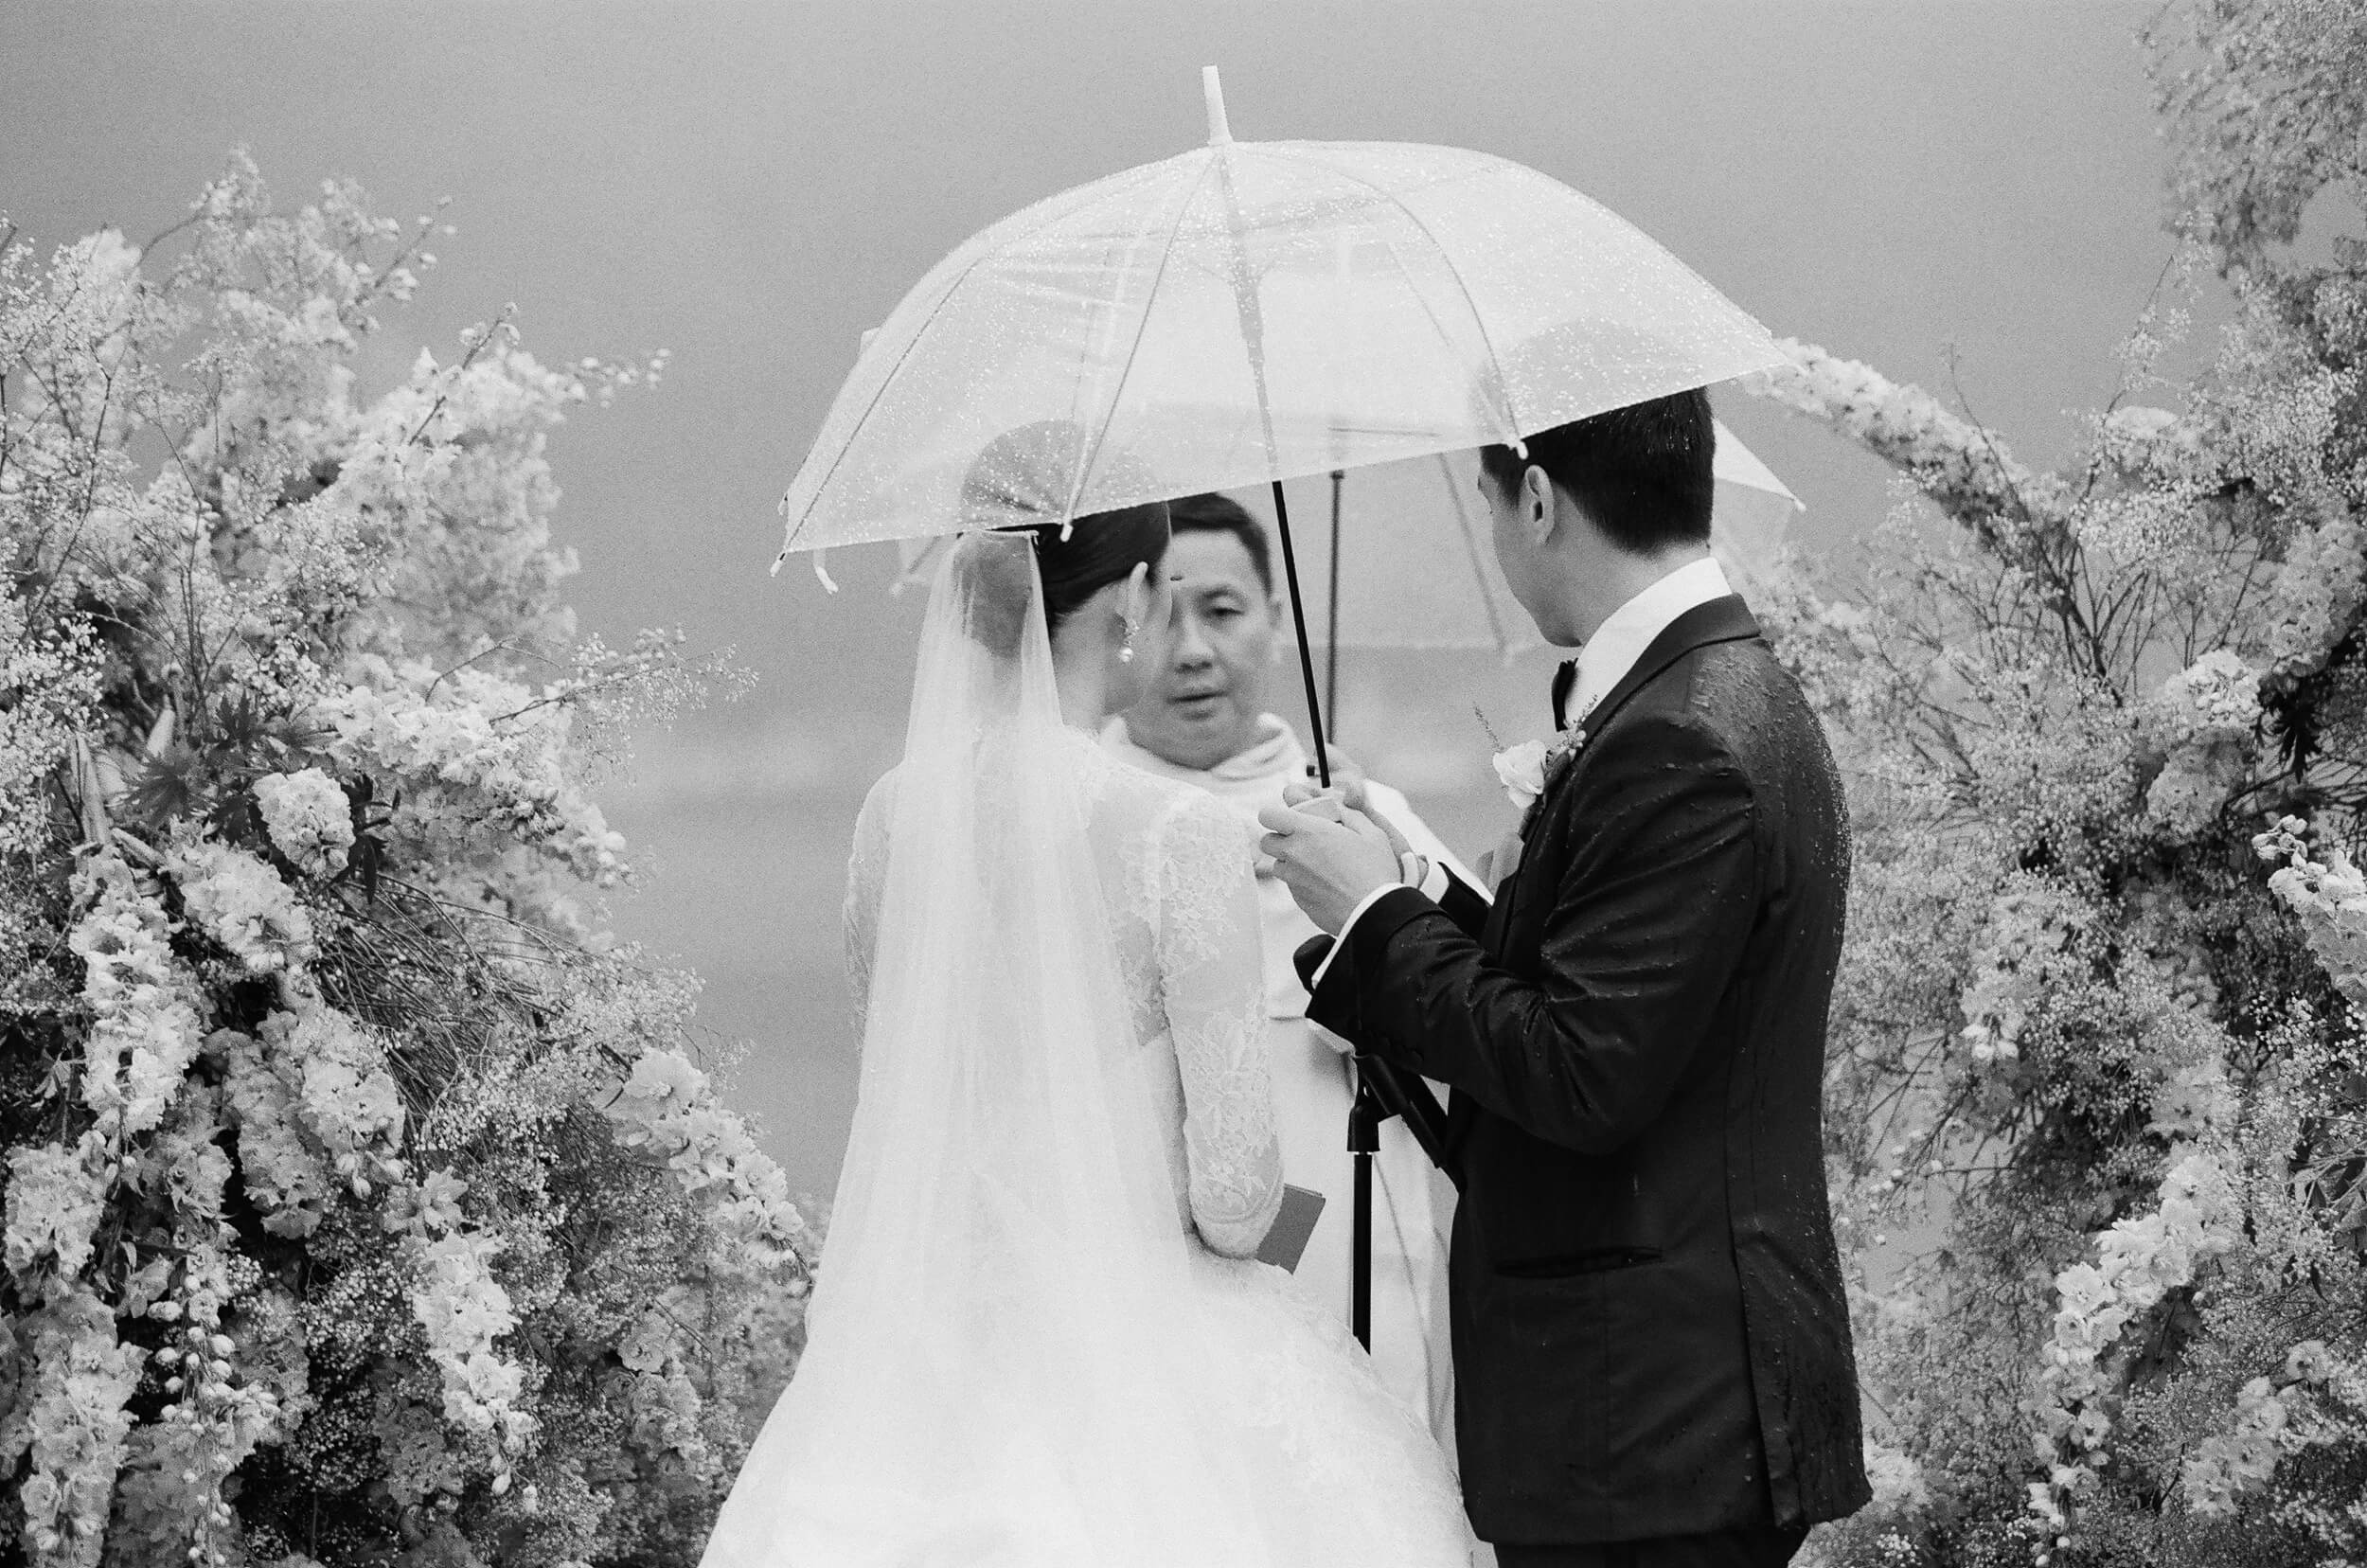 Black and white shot of bride and groom under an umbrella at their wedding ceremony